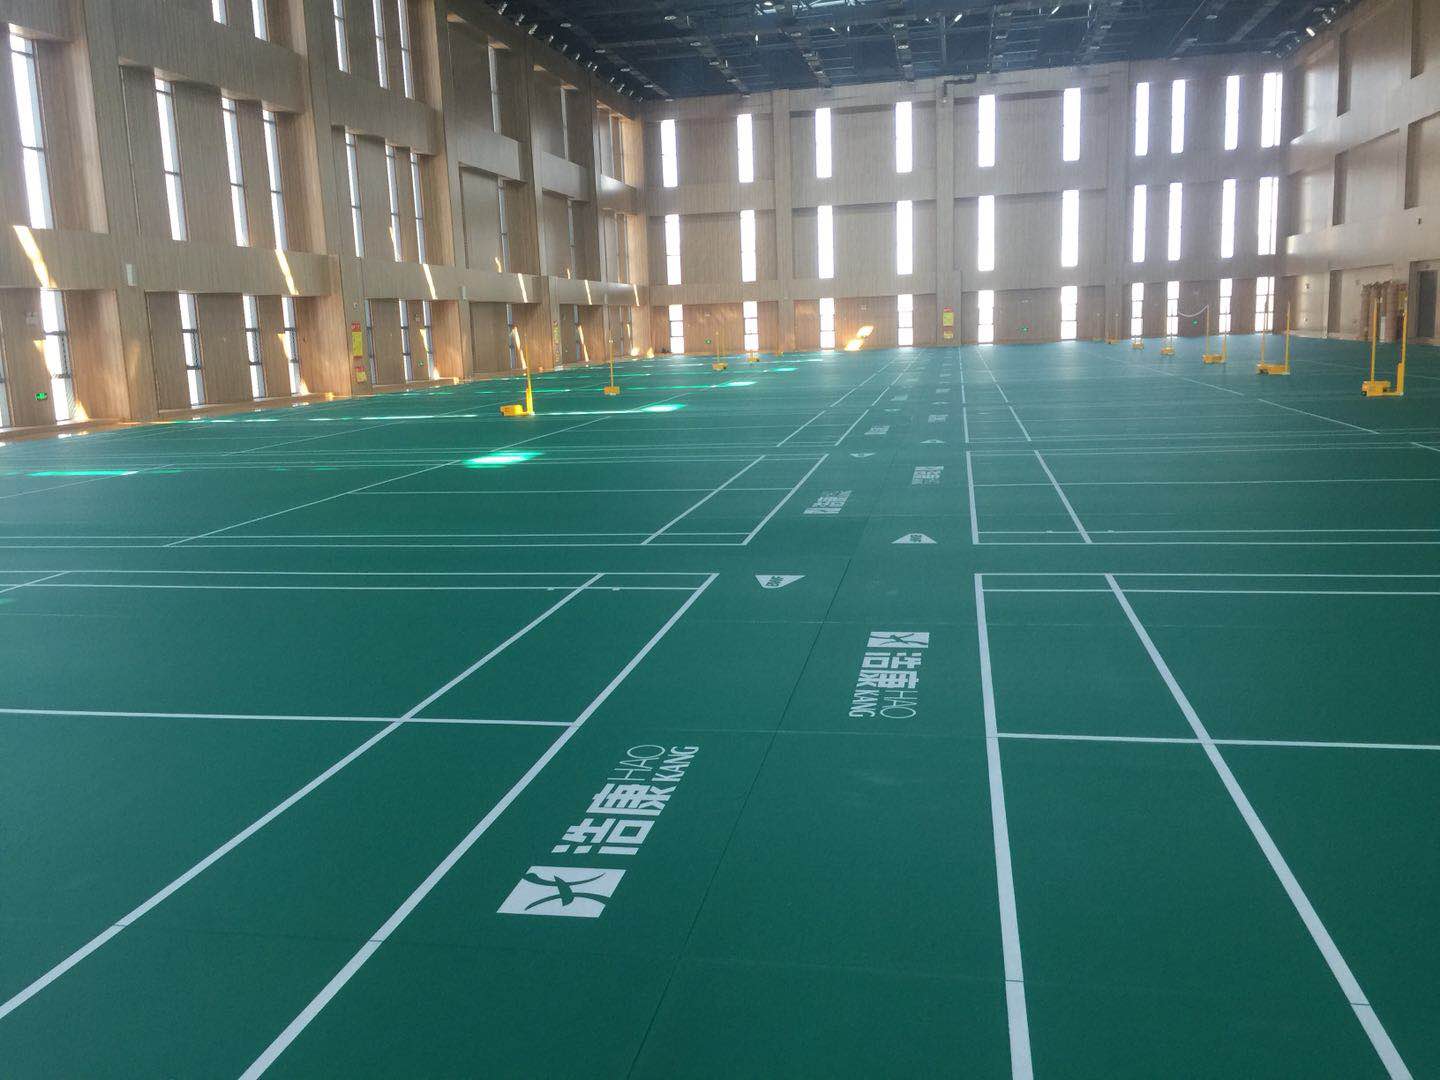 Haokang H7 badminton floor waiting for you at Tianjin University of Science and Technology